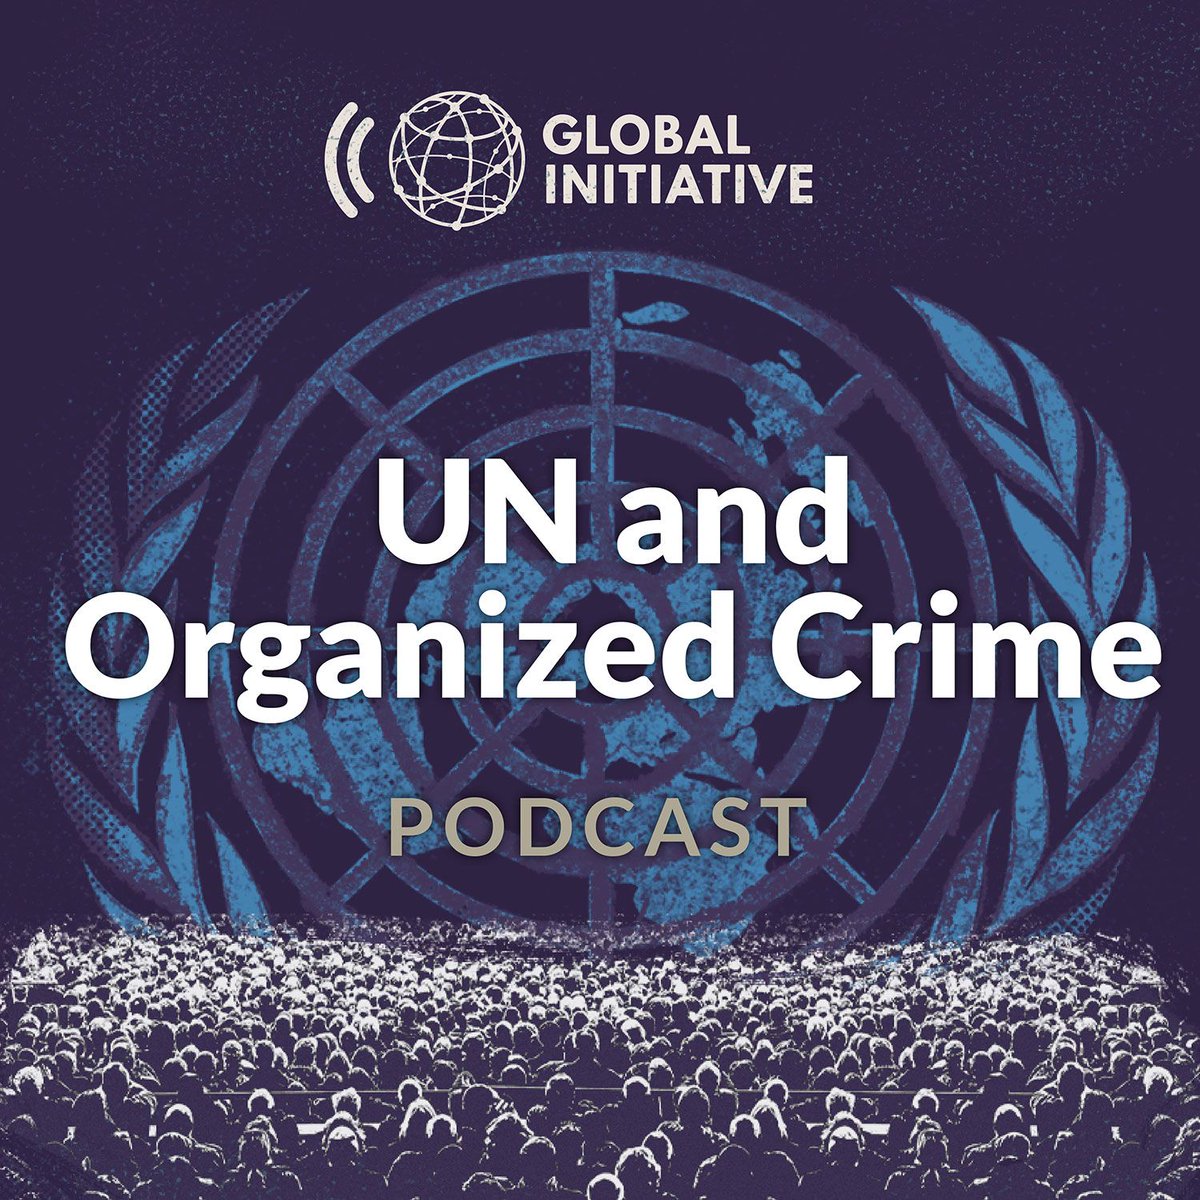 🎙️New UN and Organized Crime podcast! @LouiseTaylorGI chats with regional experts Giselle Hernandez & Tio Syamsuri about the challenges of critical technologies in facilitating #cybercrime in #SoutheastAsia. 🎧 Listen to the full episode now: buff.ly/3Uo4kdI